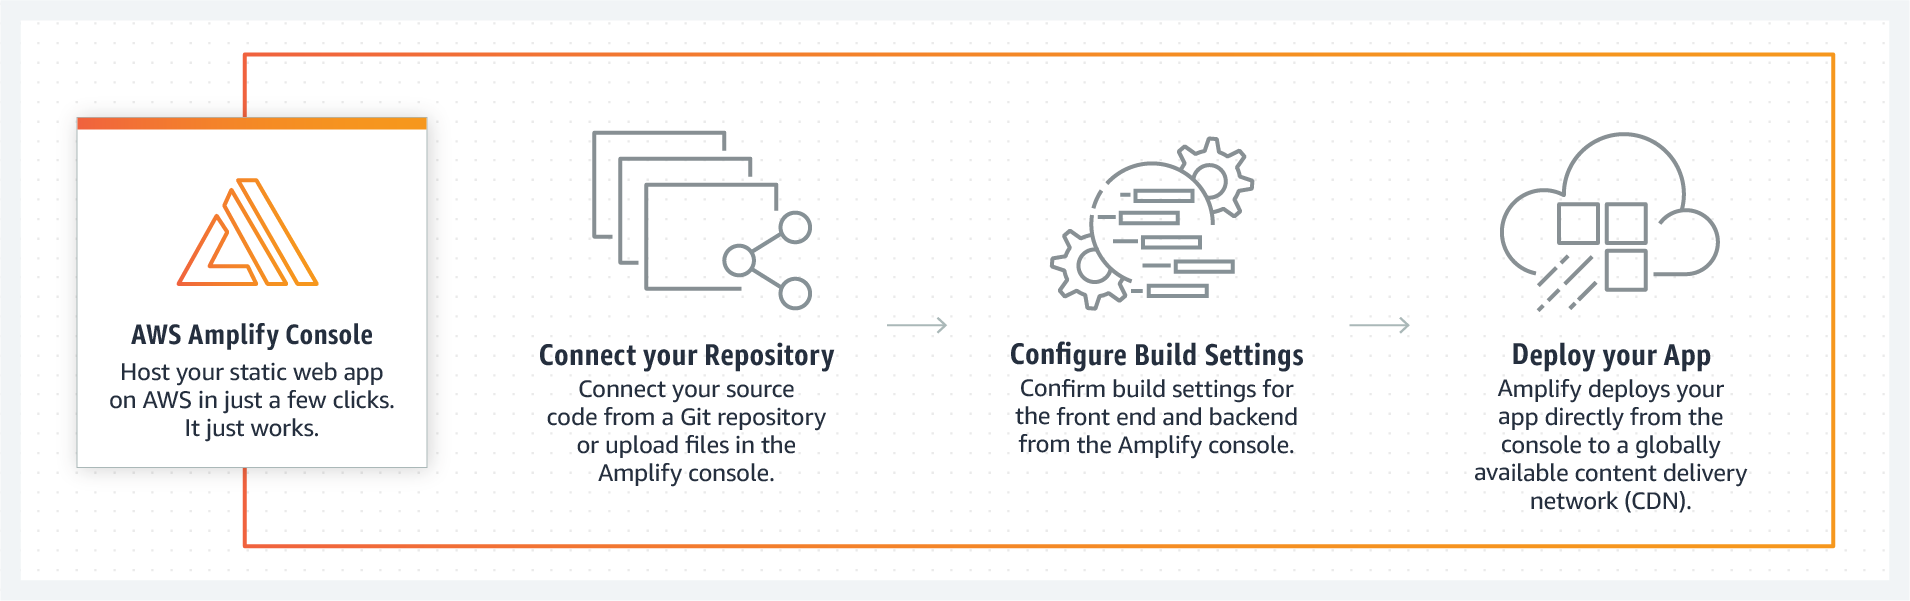 Amplify Console Workflow